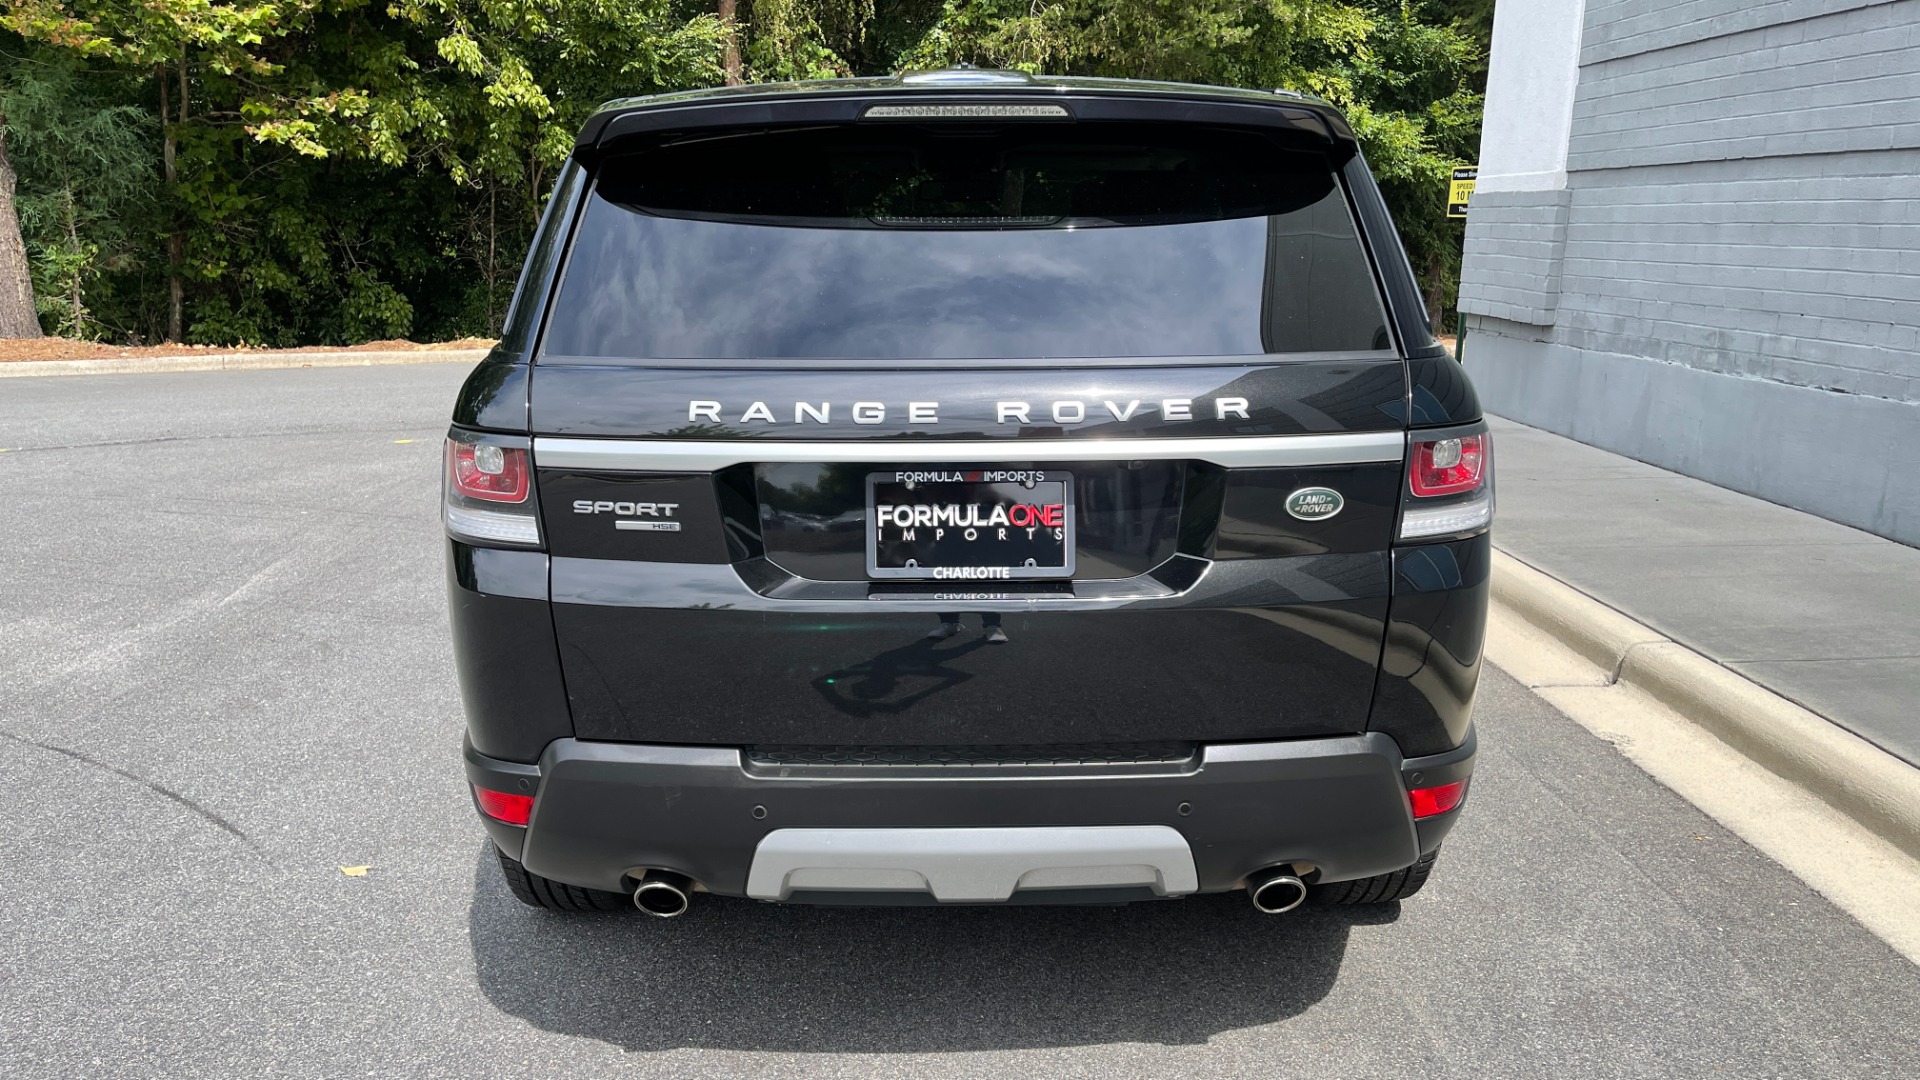 Used 2015 Land Rover Range Rover Sport HSE / SUPERCHARGED / MERIDIAN SOUND / DRIVER ASSISTANCE / PANORAMIC ROOF /  for sale $34,995 at Formula Imports in Charlotte NC 28227 8